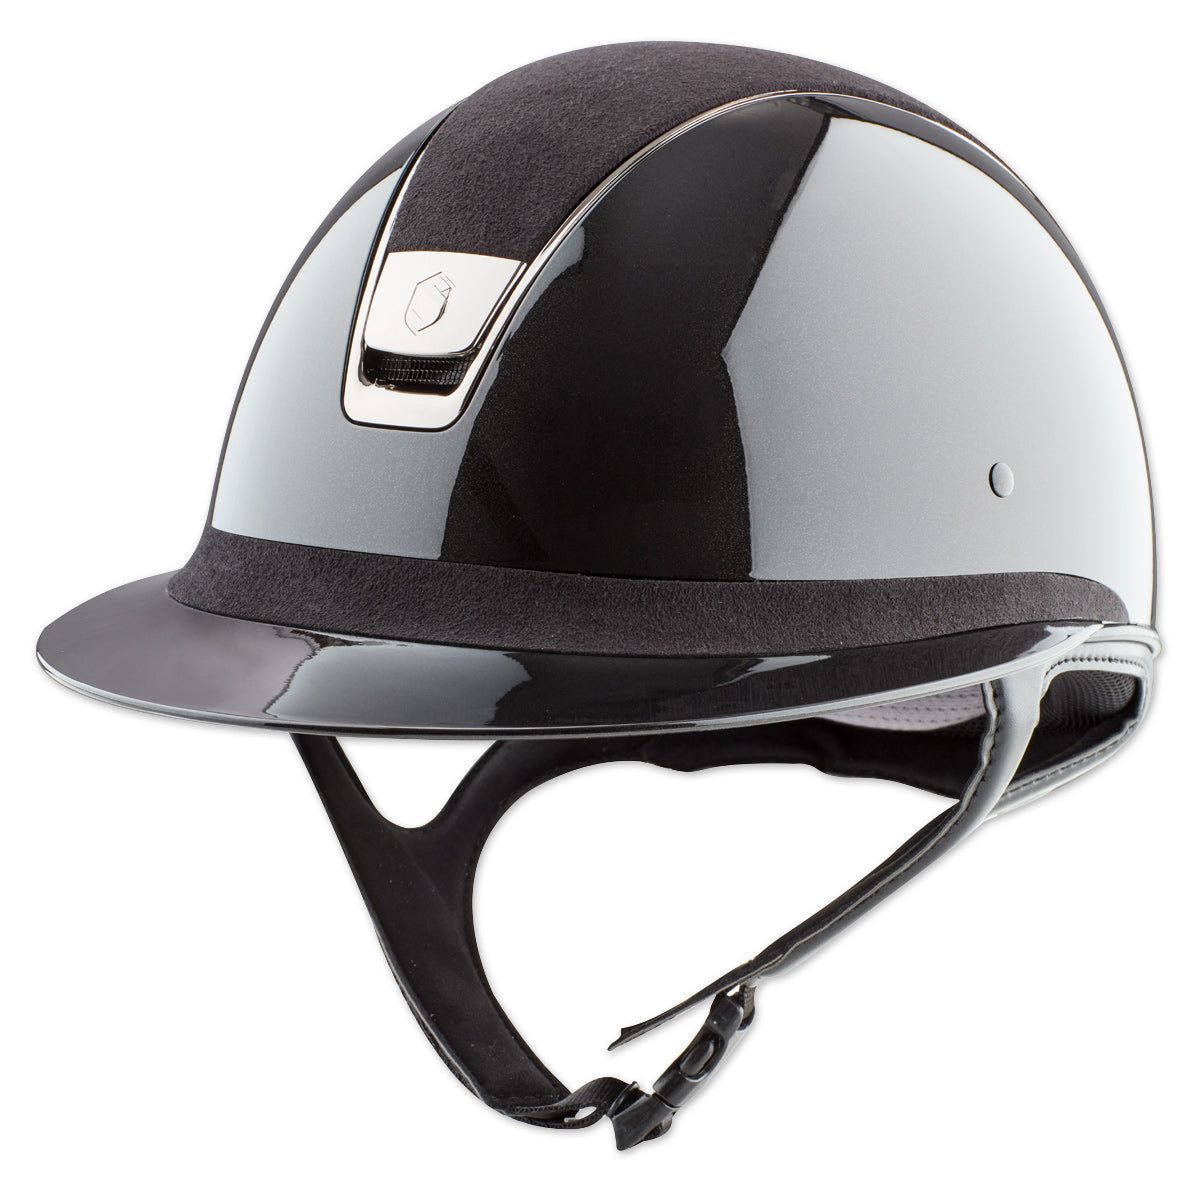 Miss Helmet Glossy with Top Luxe EQ